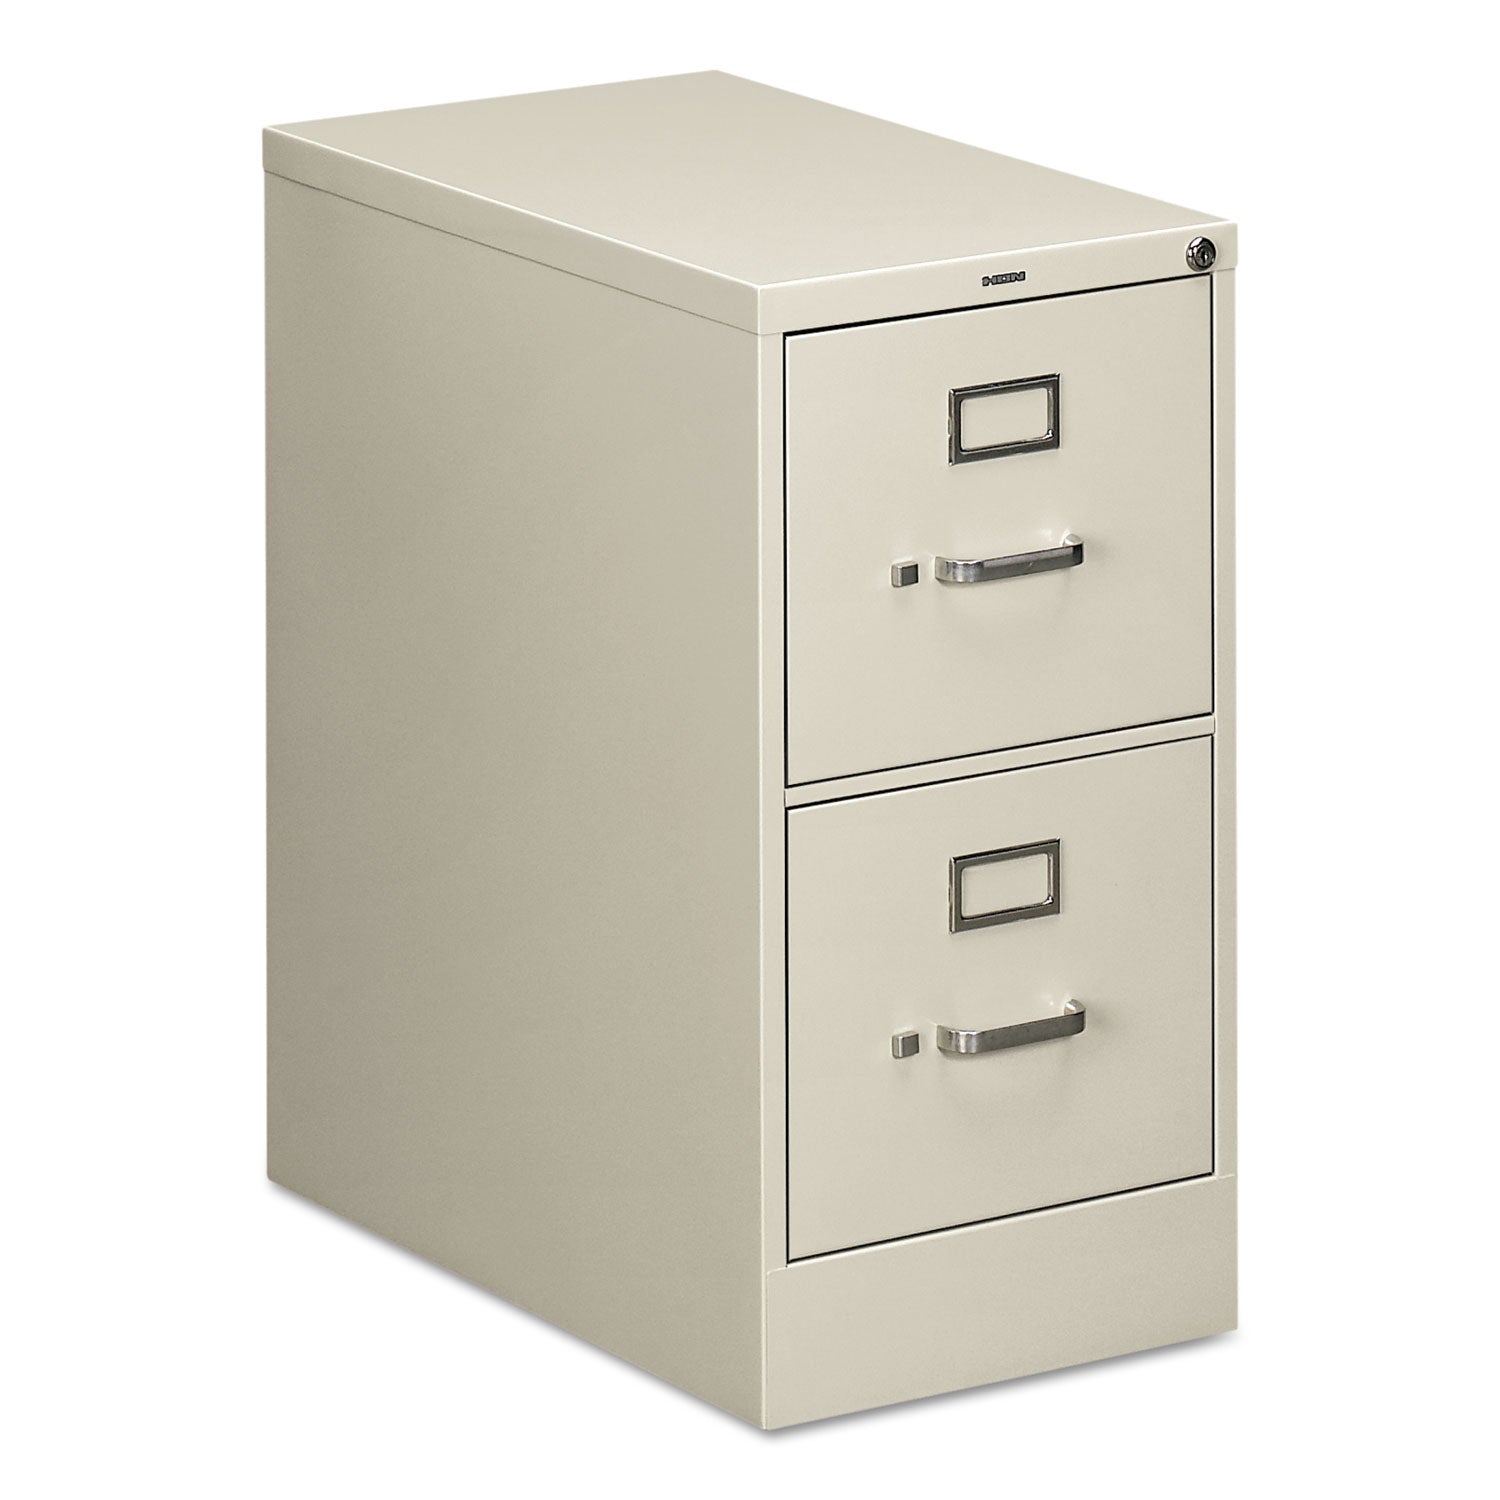 510 Series Vertical File, 2 Letter-Size File Drawers, Light Gray, 15" x 25" x 29 - 